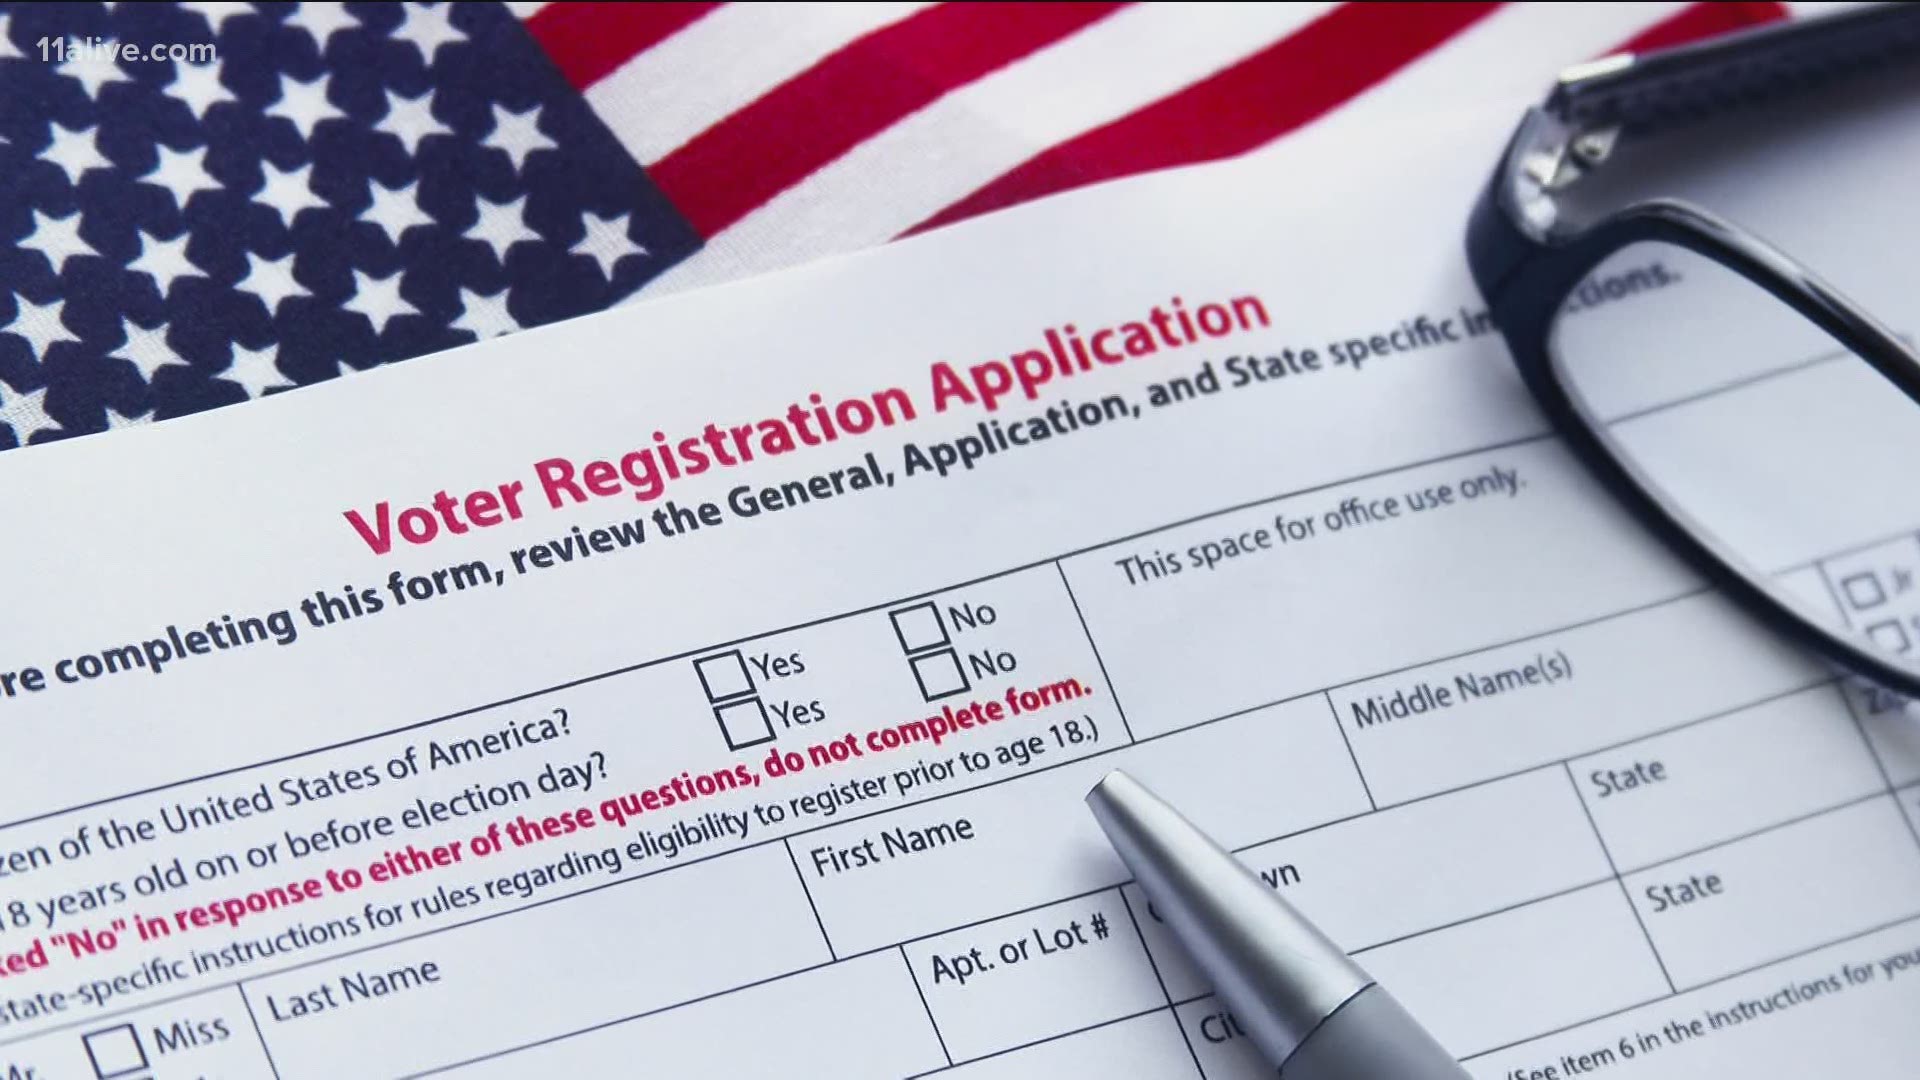 Voter registration is a county function